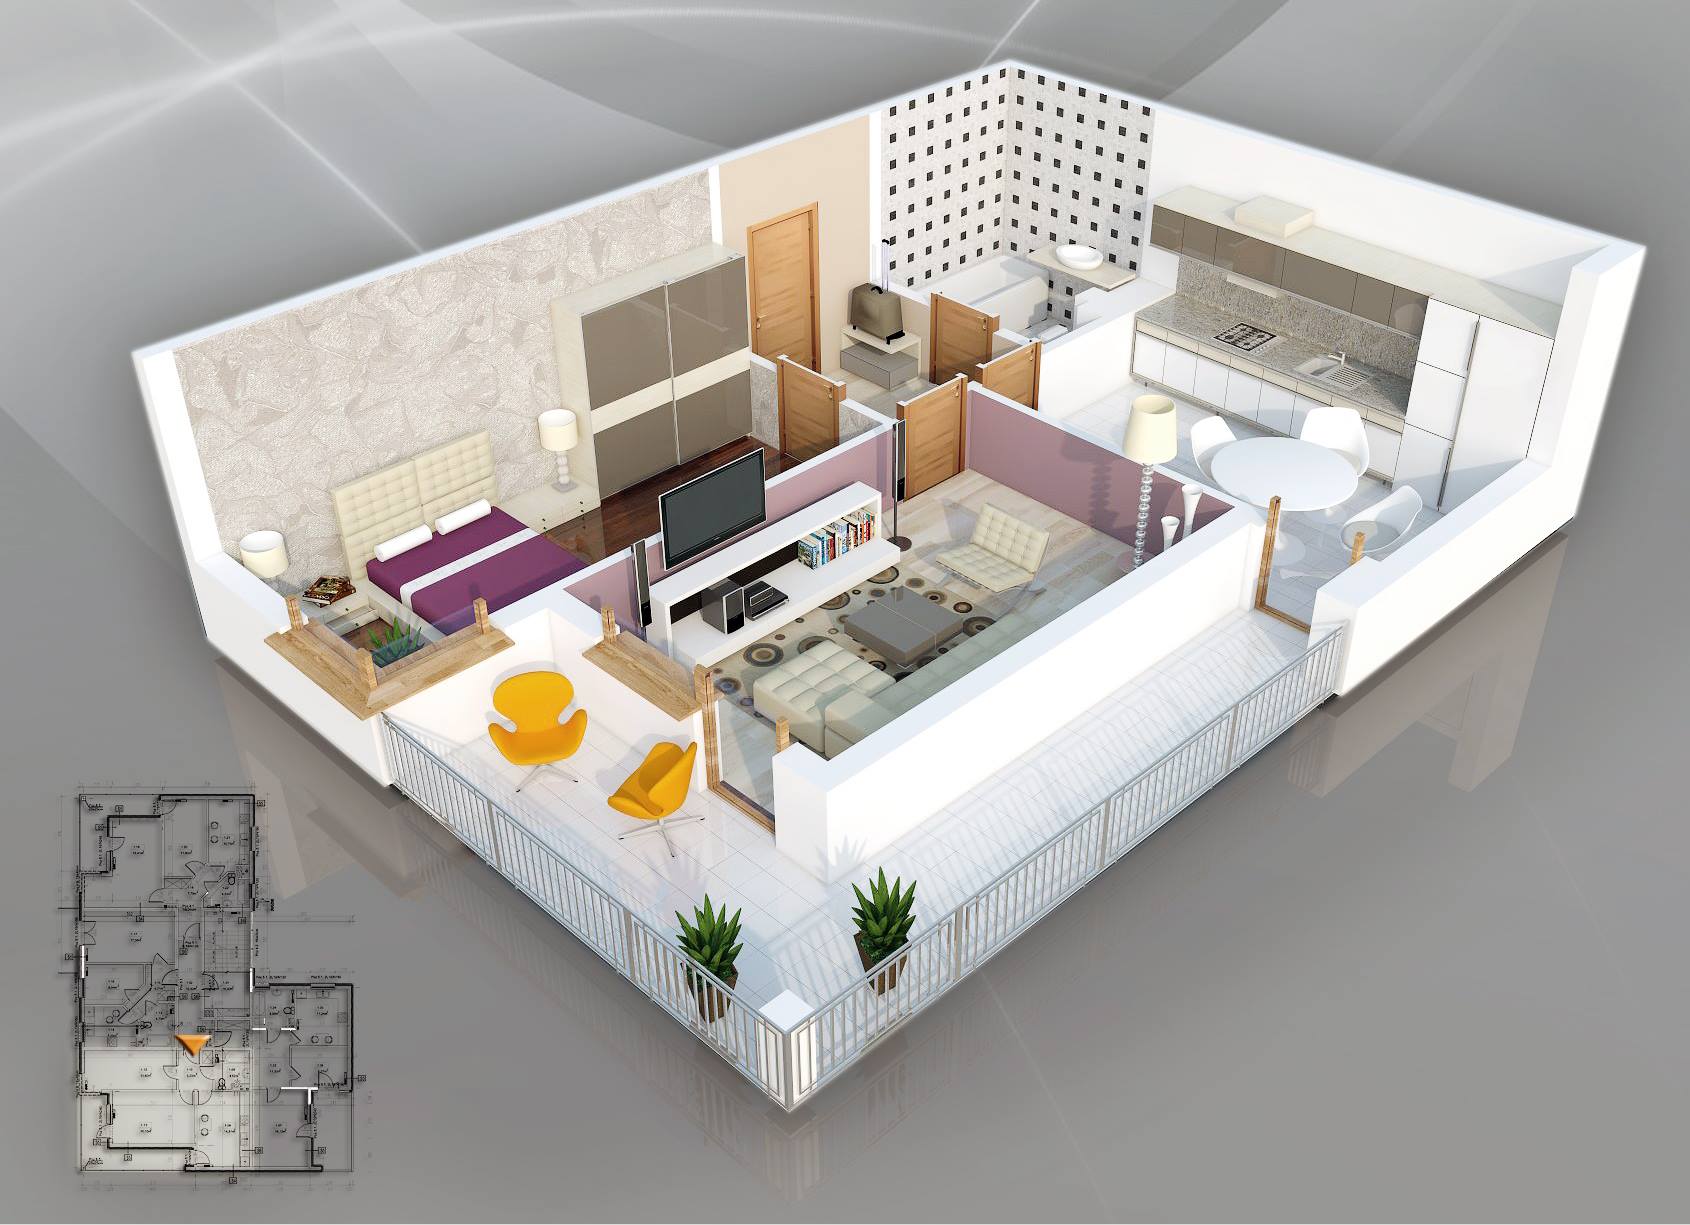 50 One “1” Bedroom Apartment/House Plans Architecture